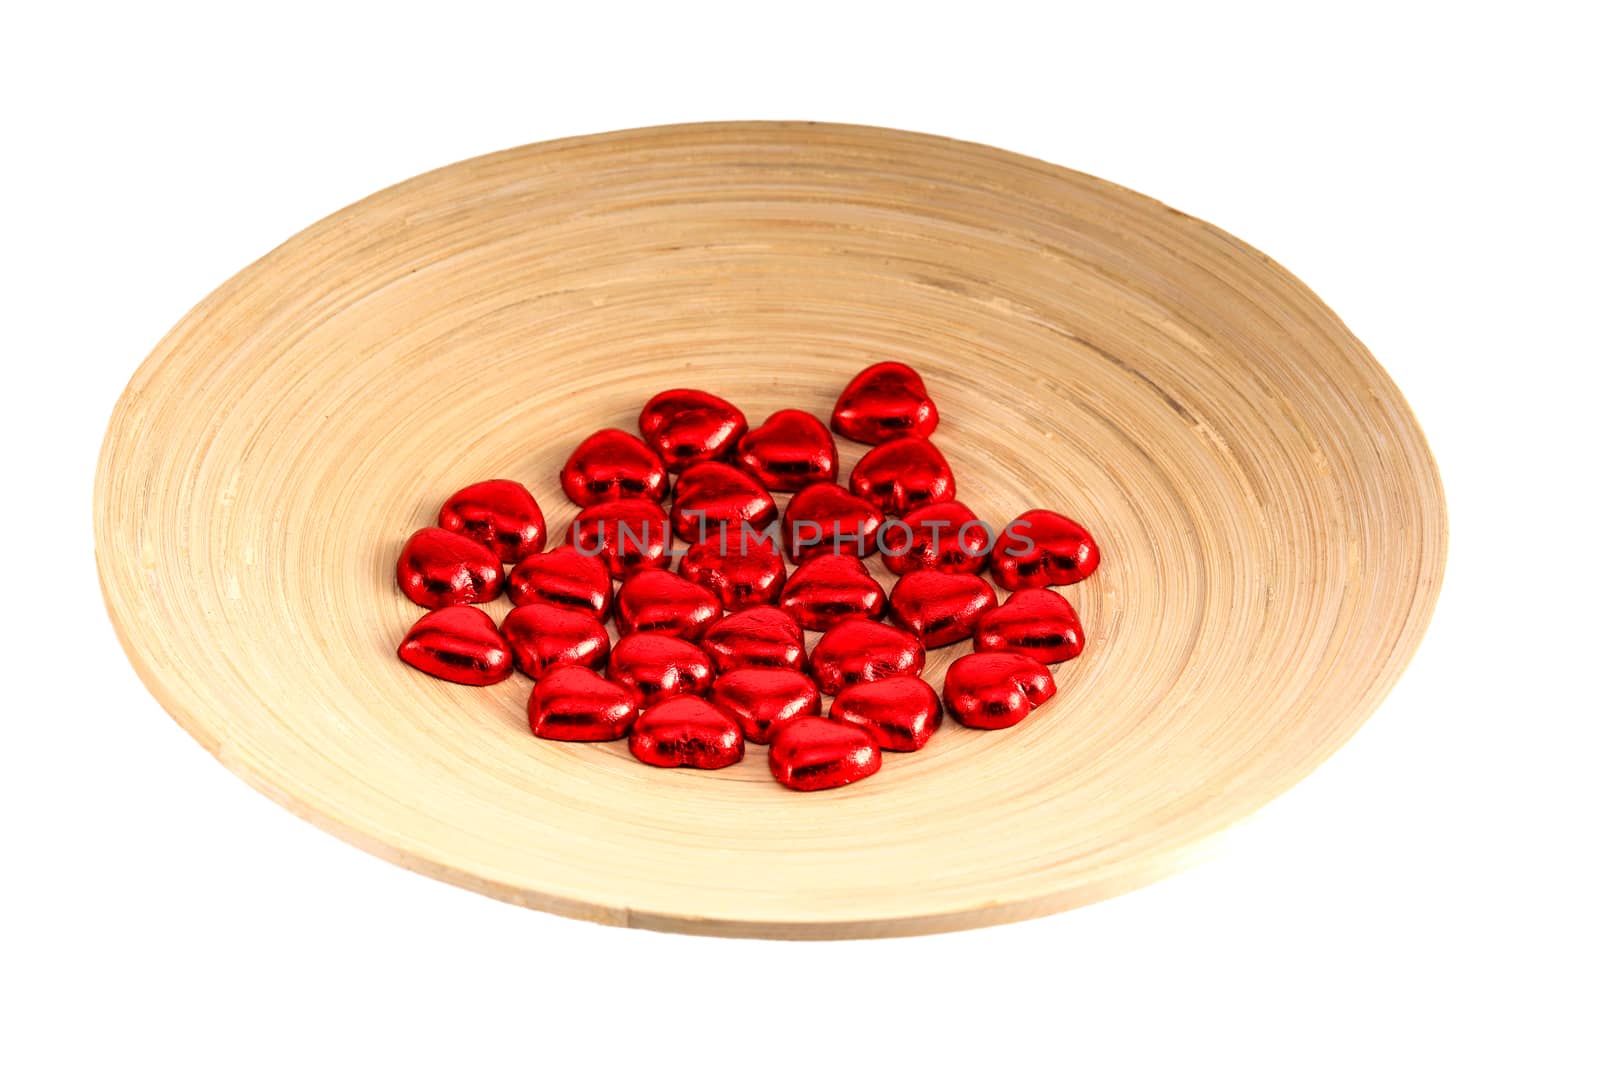 red heart-shaped chocolate candies on a bamboo plate, isolated on white background, Valentines' day concept